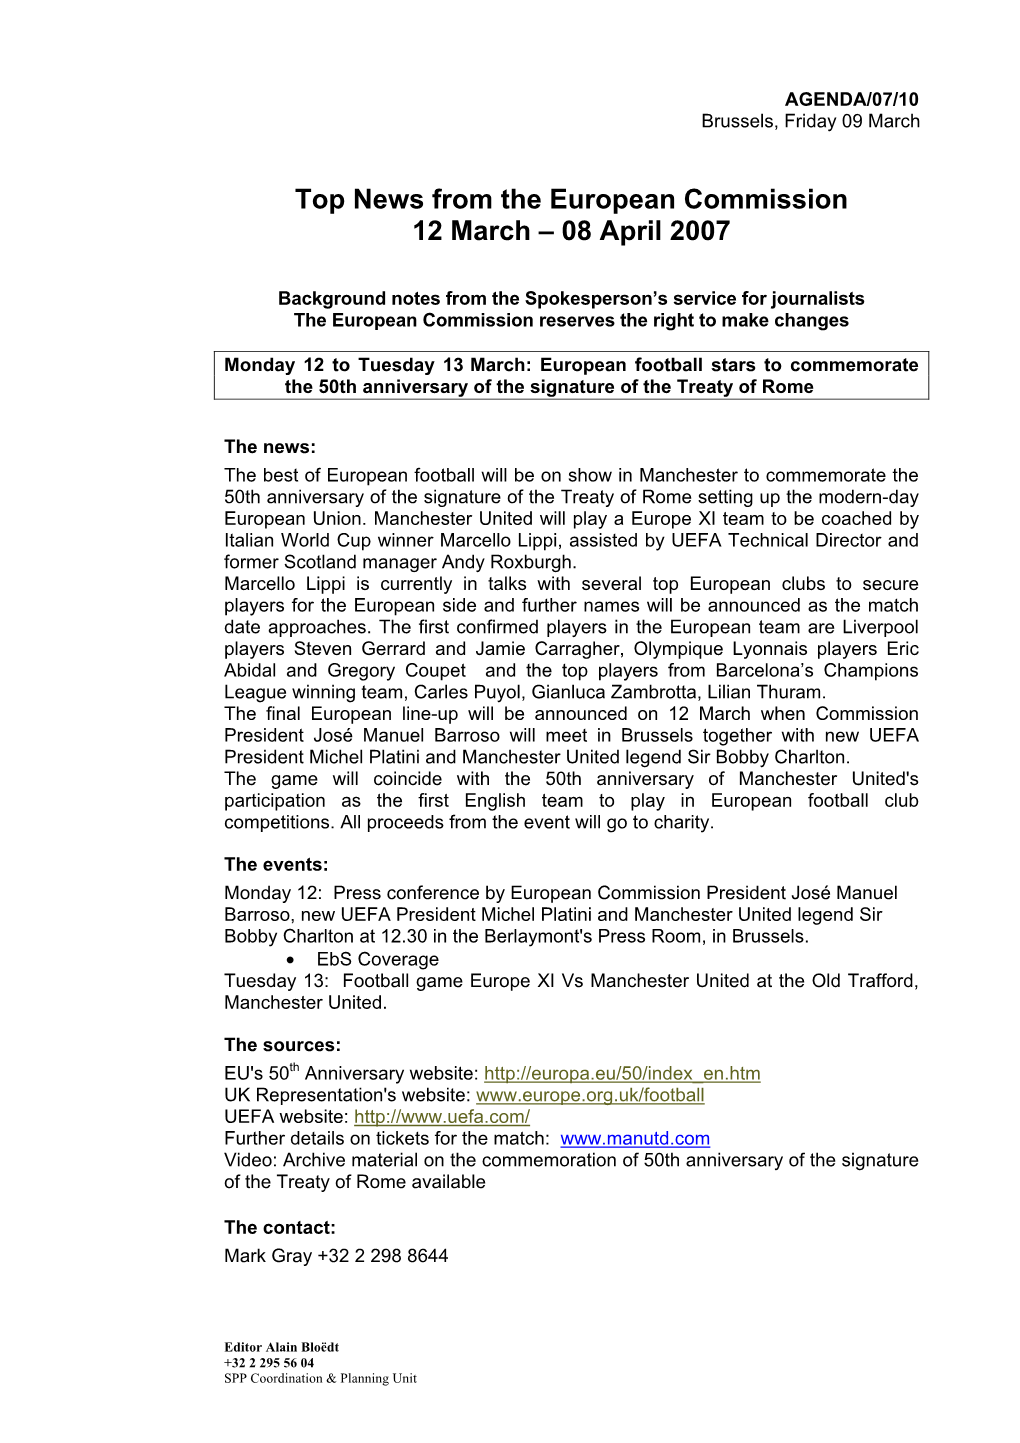 Top News from the European Commission 12 March – 08 April 2007